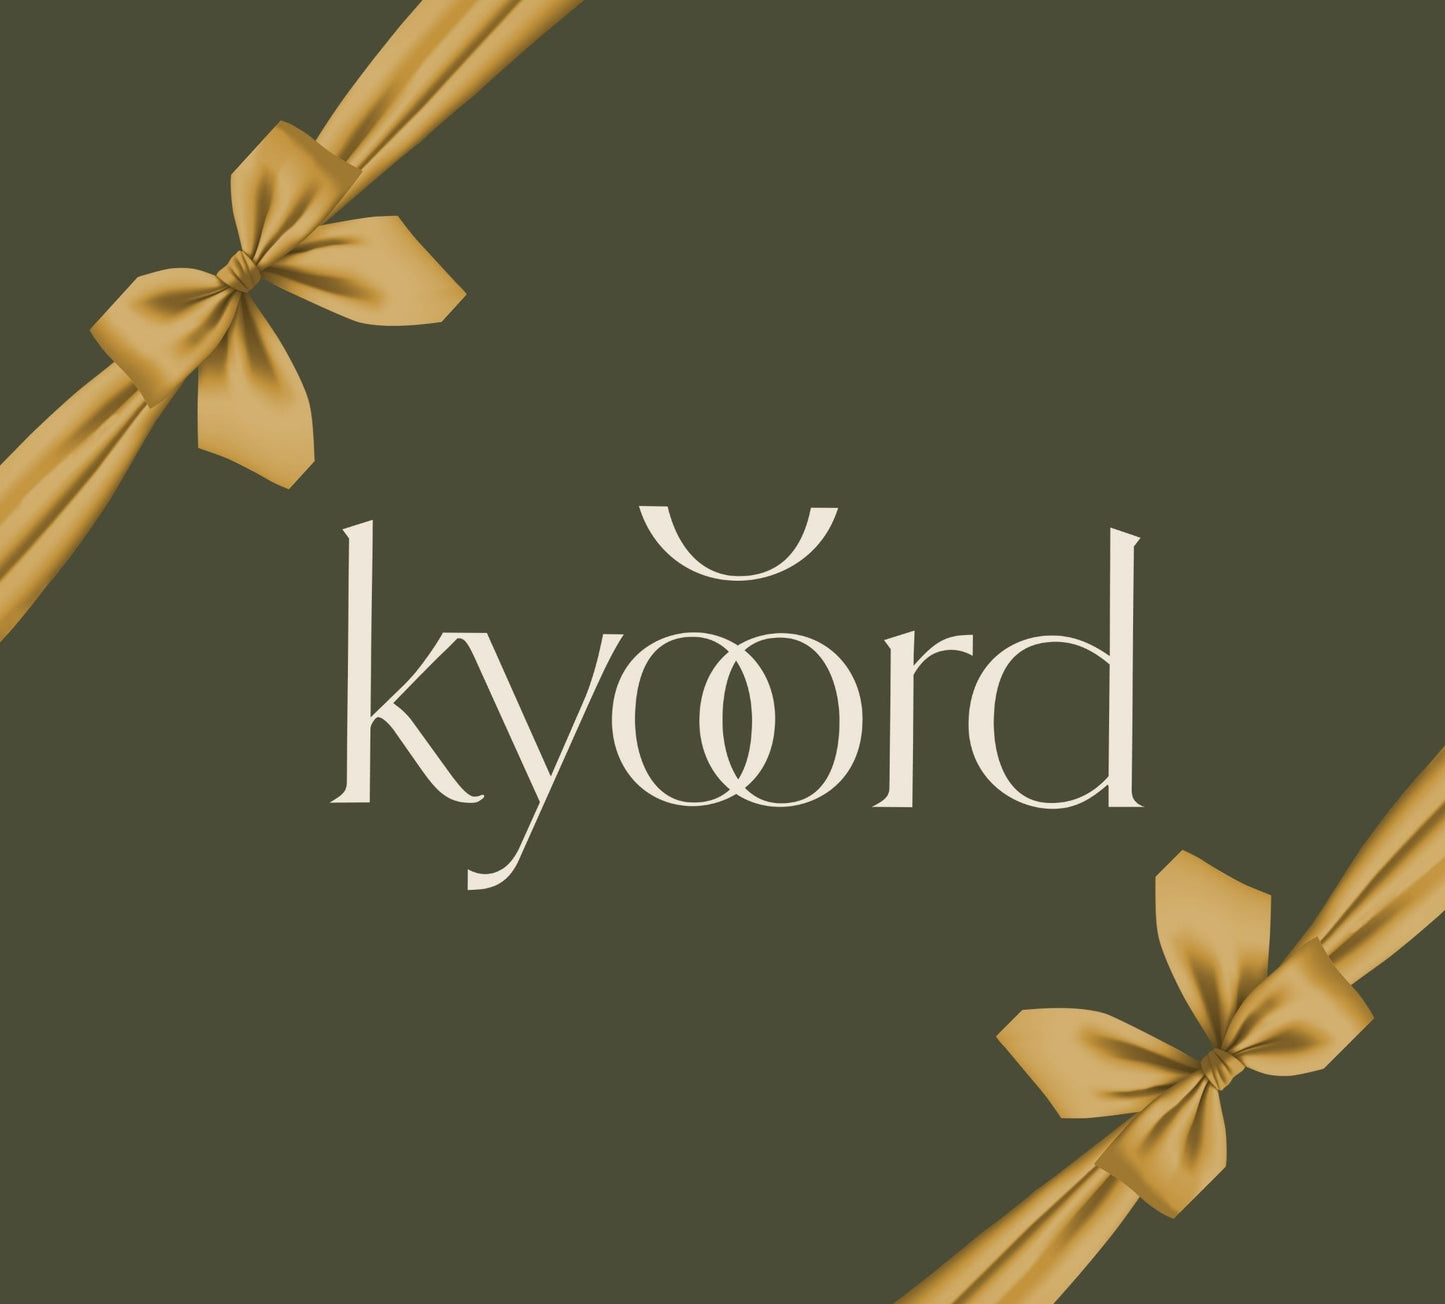 kyoord Gift Card